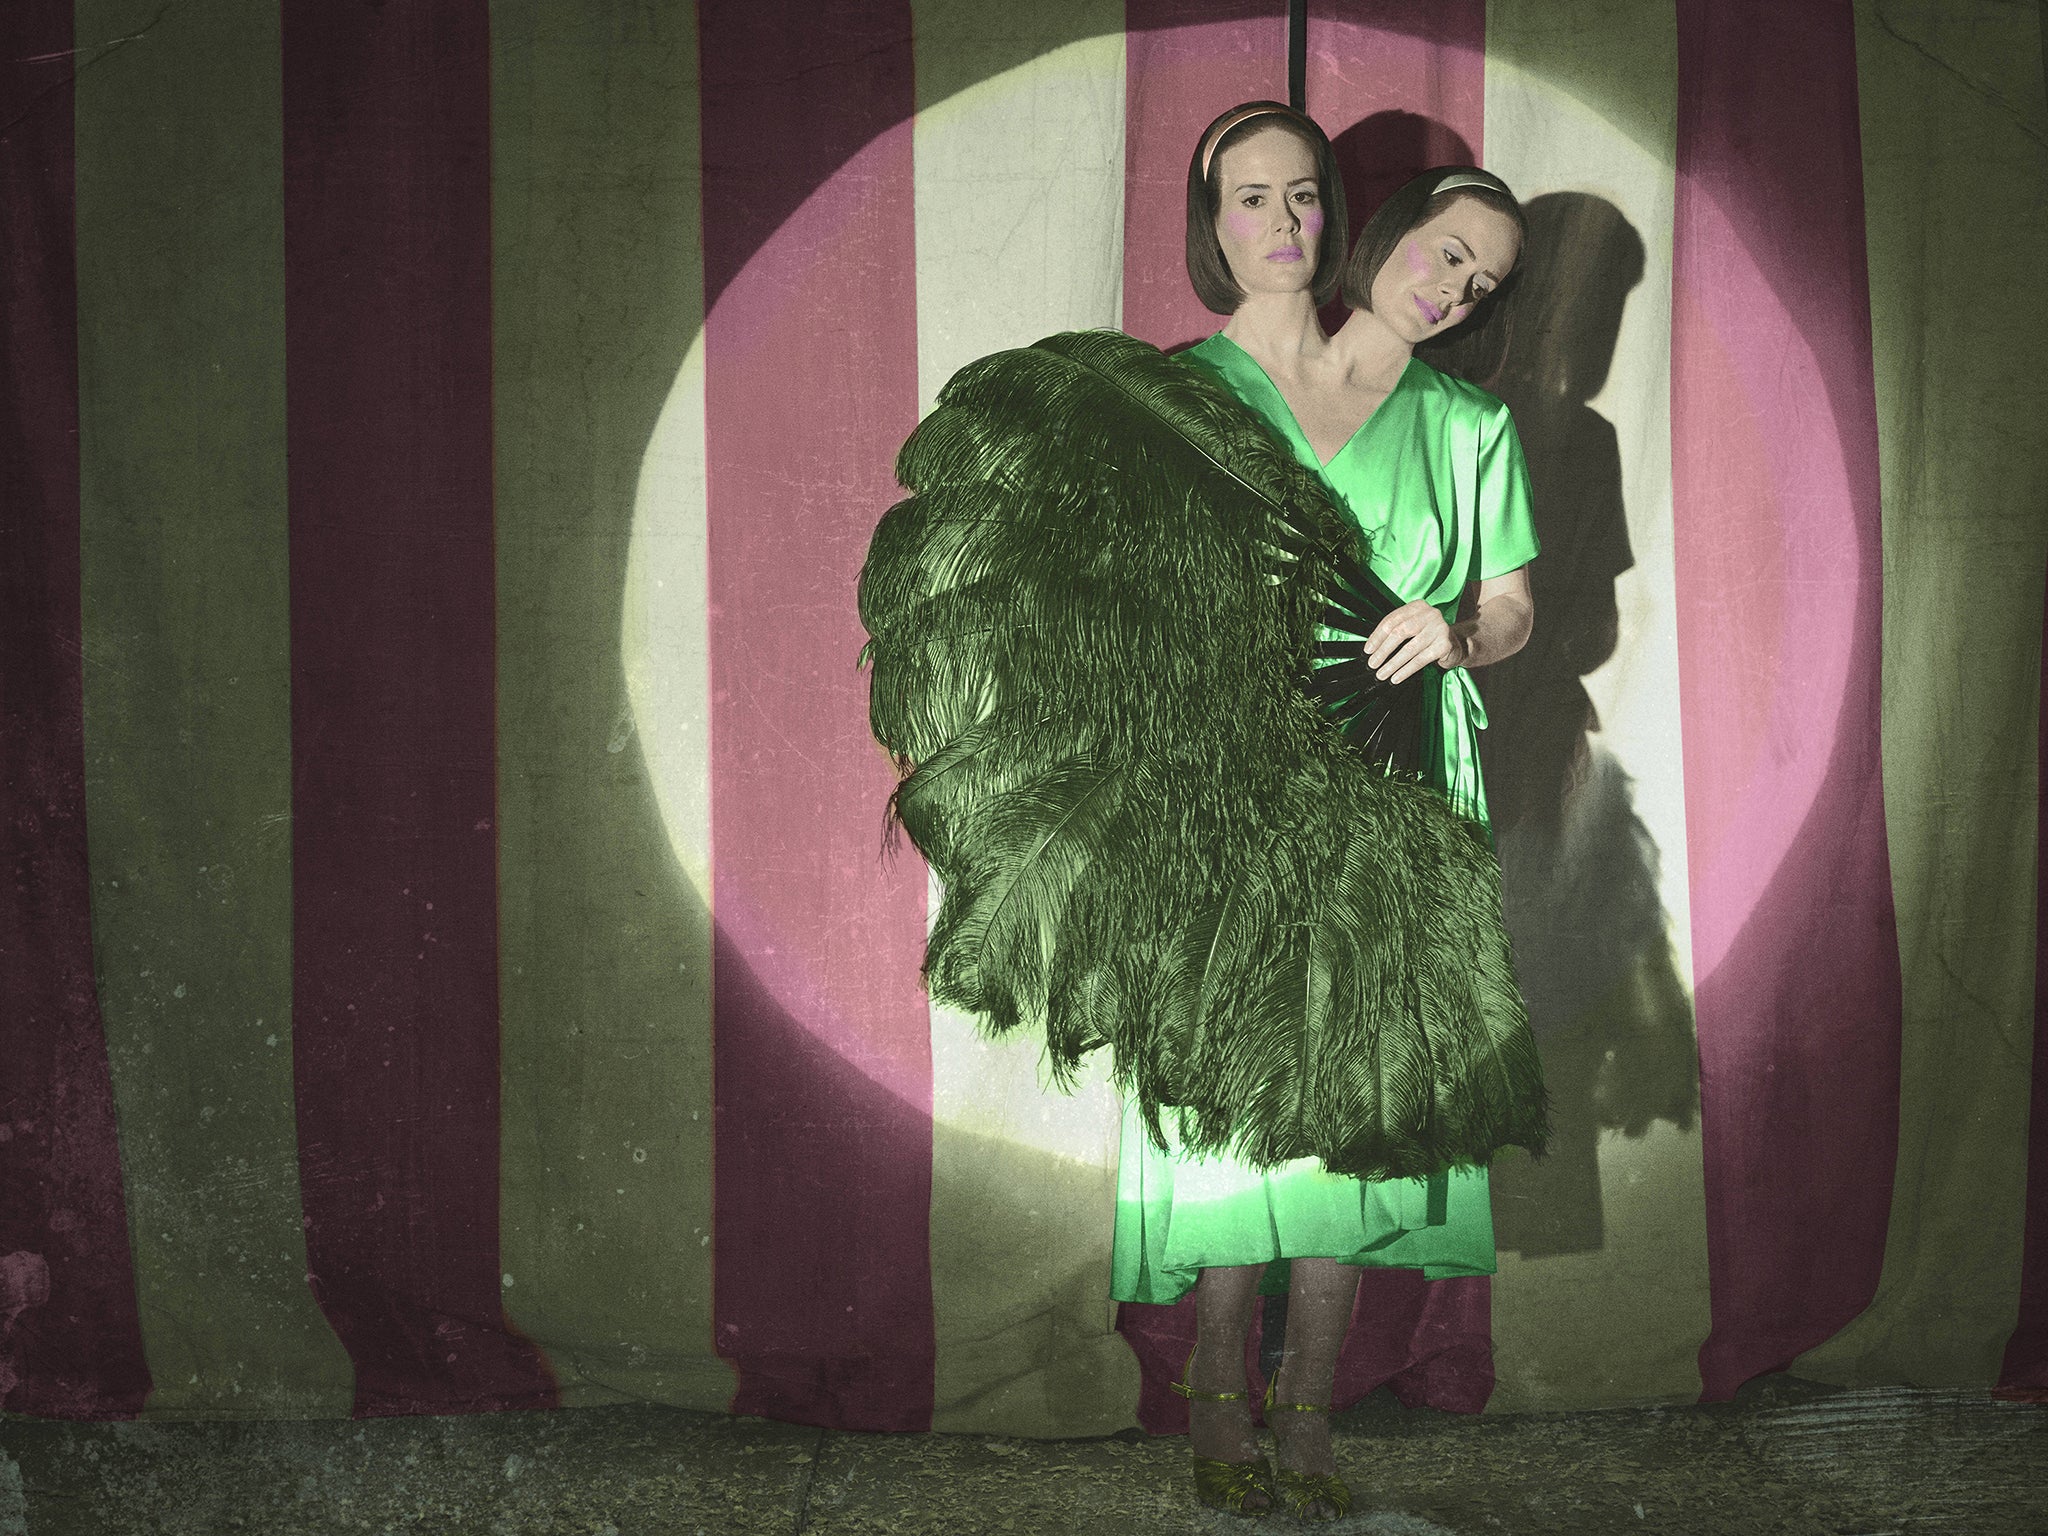 American Horror Story Season 4 Teaser Pictures Offer Fans First Look At Freak Show Characters